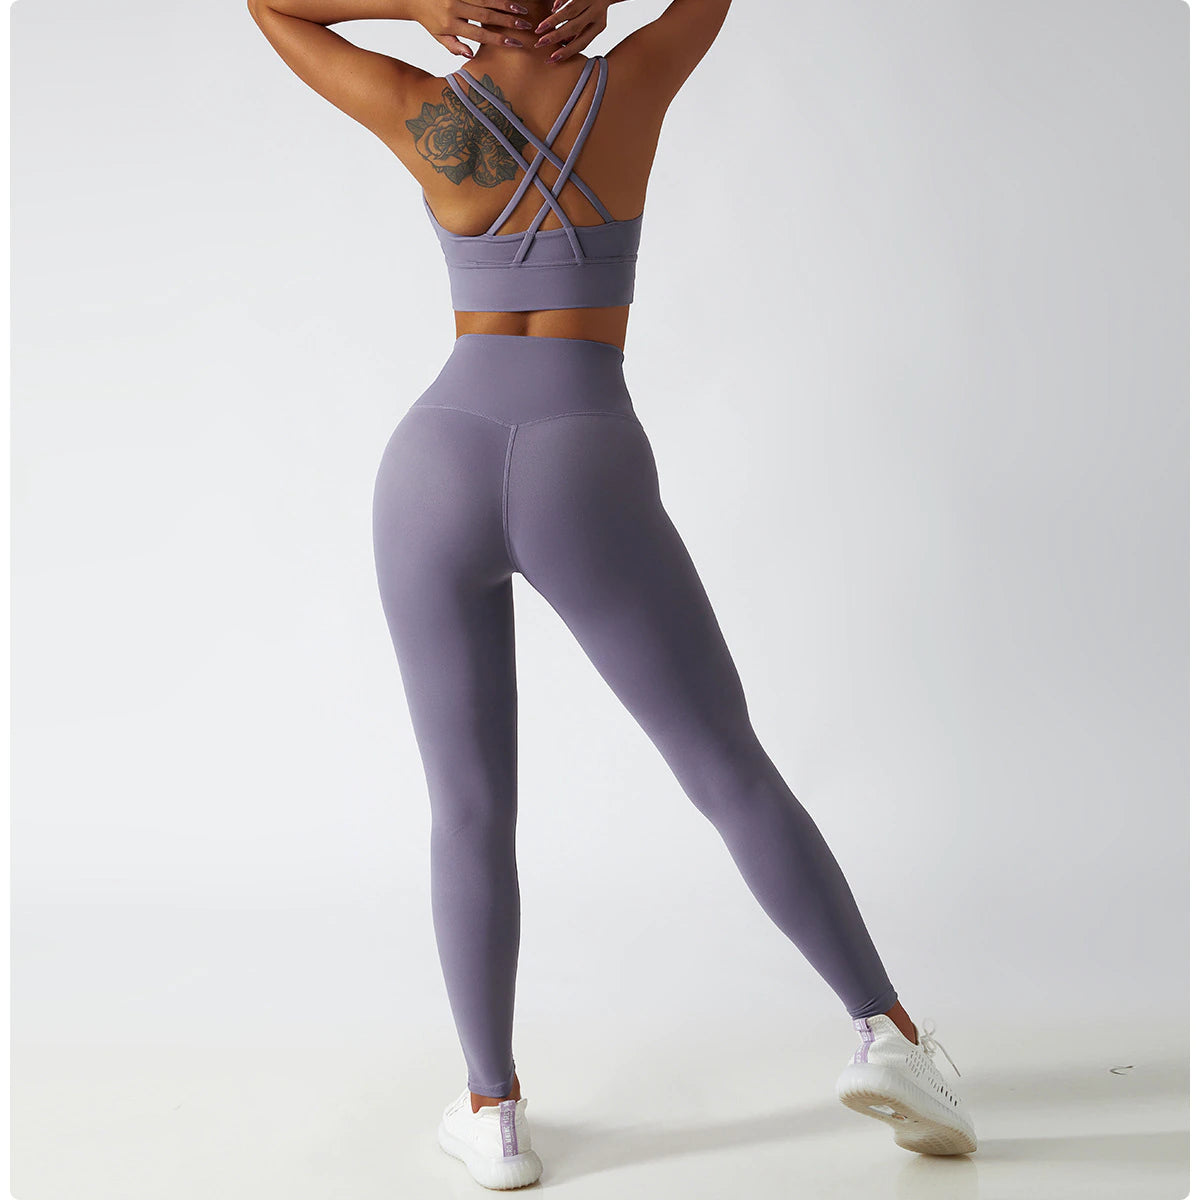 Women's Vitality Set in breathable nylon/spandex blend. Seamless high-waisted leggings for a flattering fit. Strappy sports bra with removable pads. Quick-drying material for comfort during workouts. Stylish and functional – a must-have for any active woman's wardrobe.